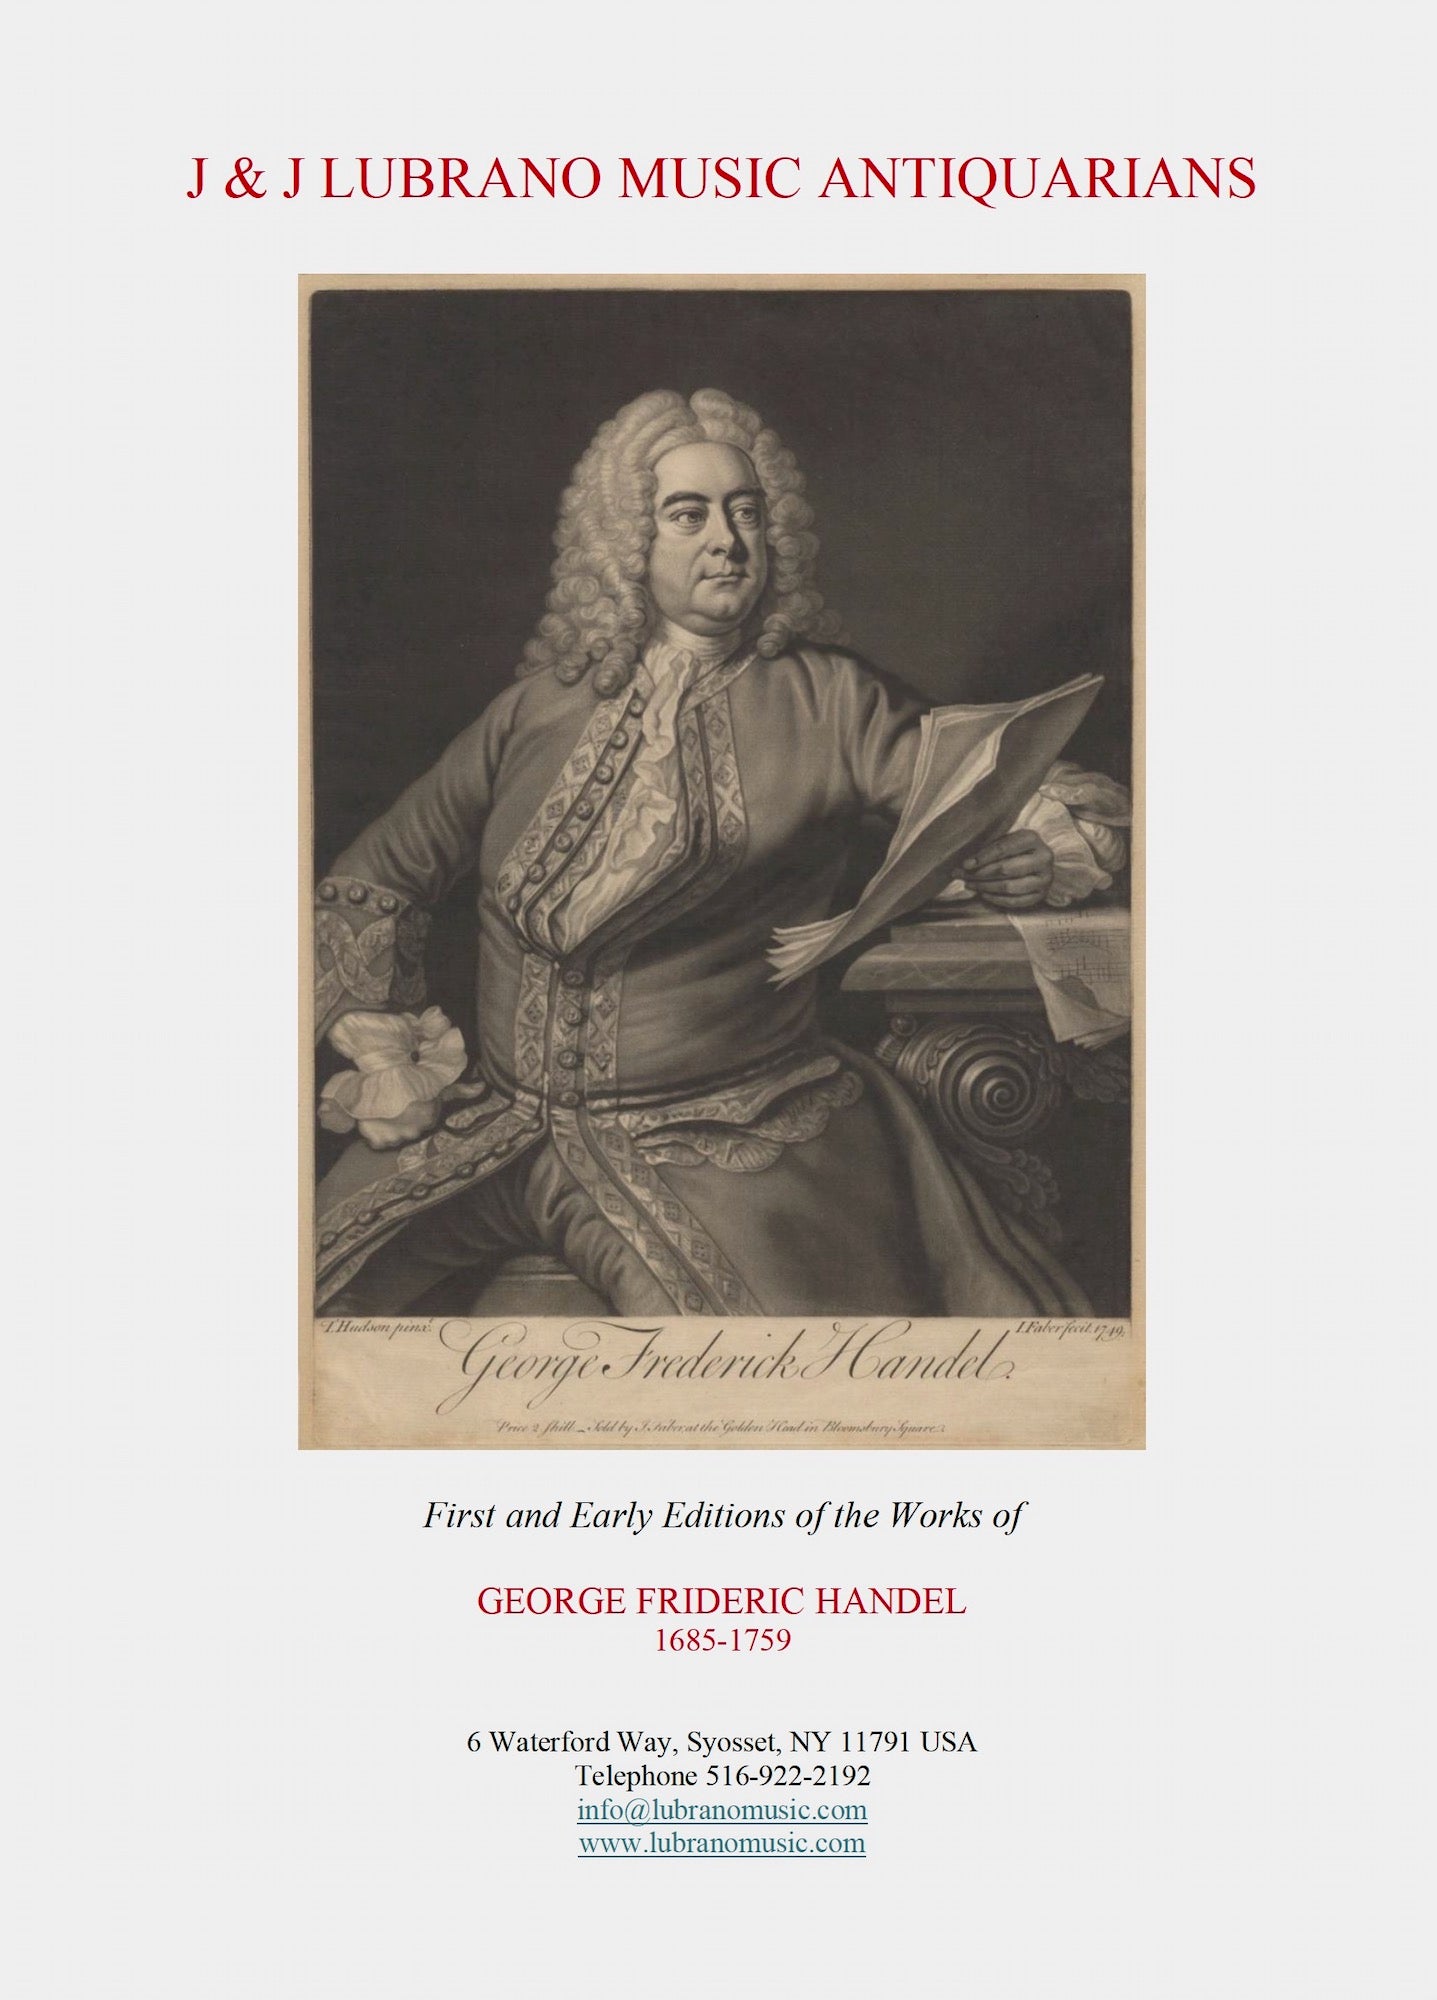 FIRST AND EARLY EDITIONS OF THE WORKS OF GEORGE FRIDERIC HANDEL